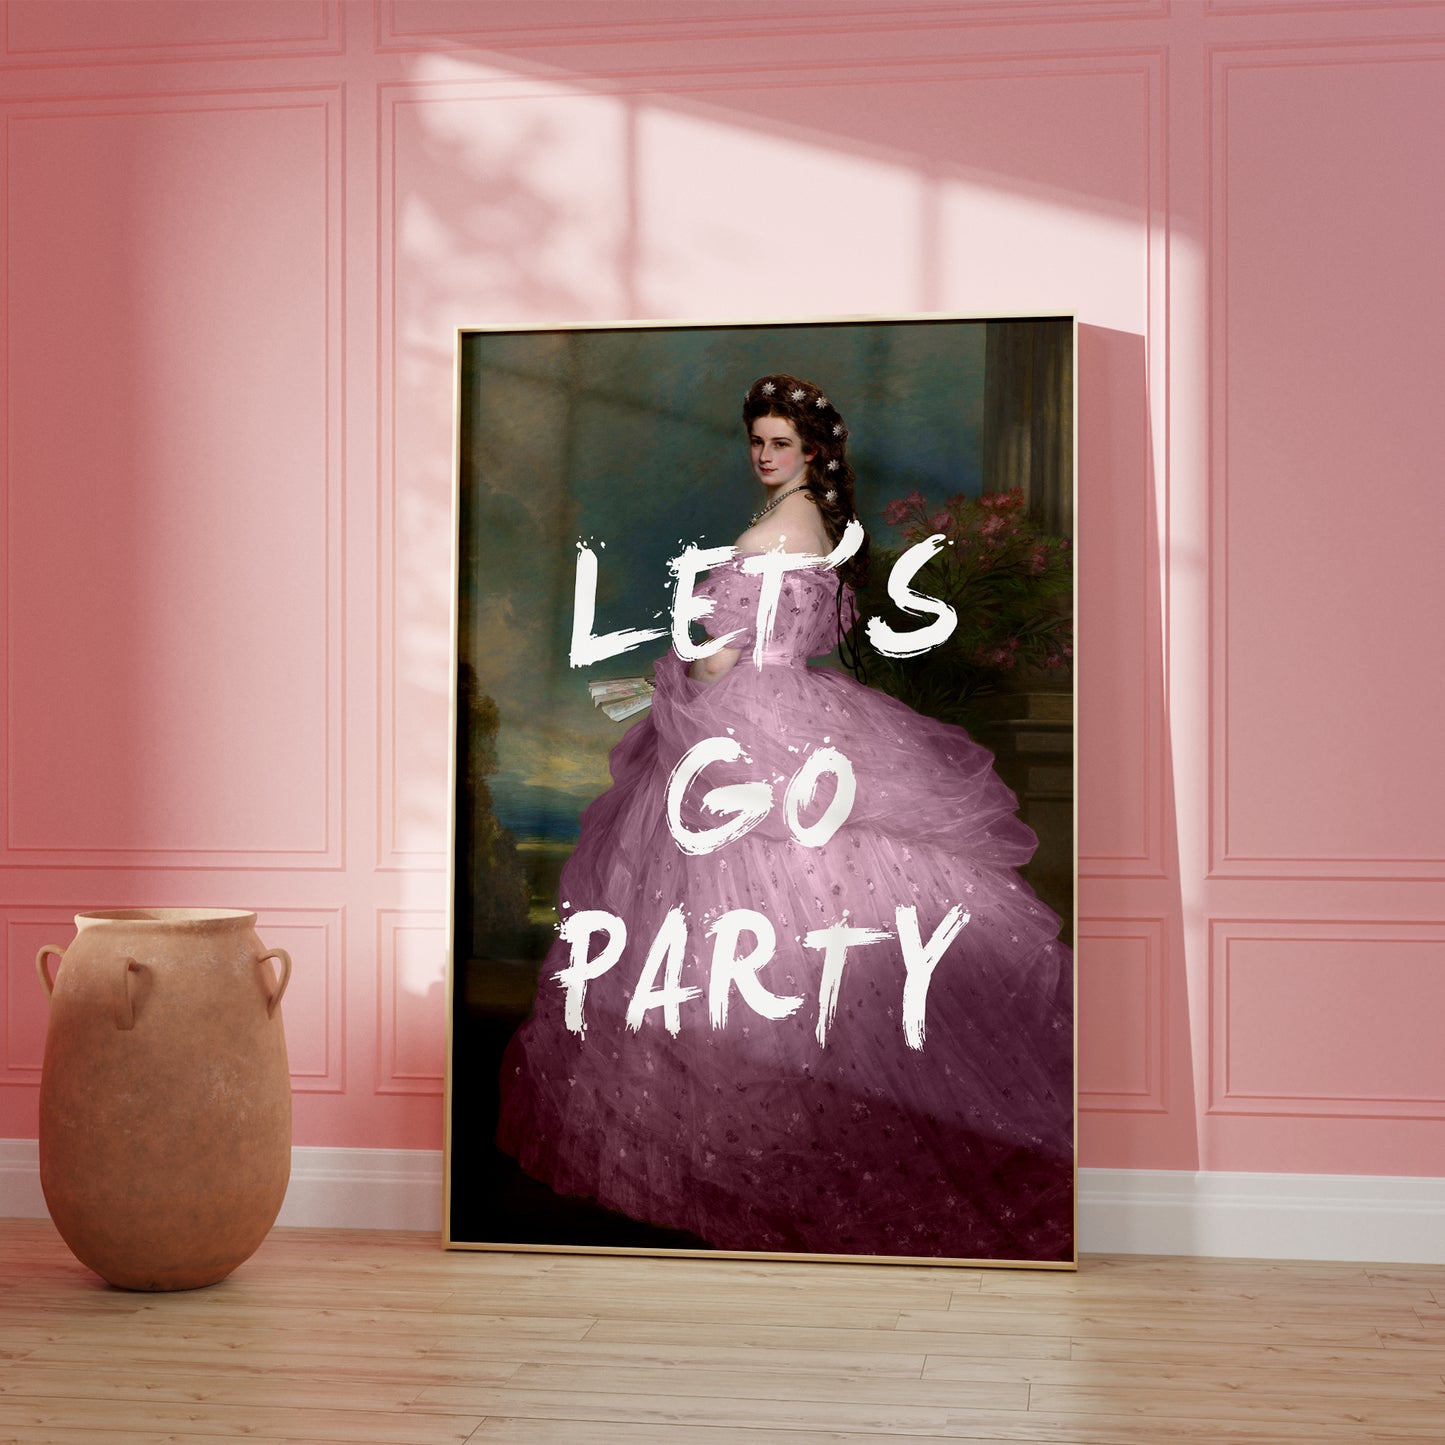 Let's Go Party Altered Art Poster